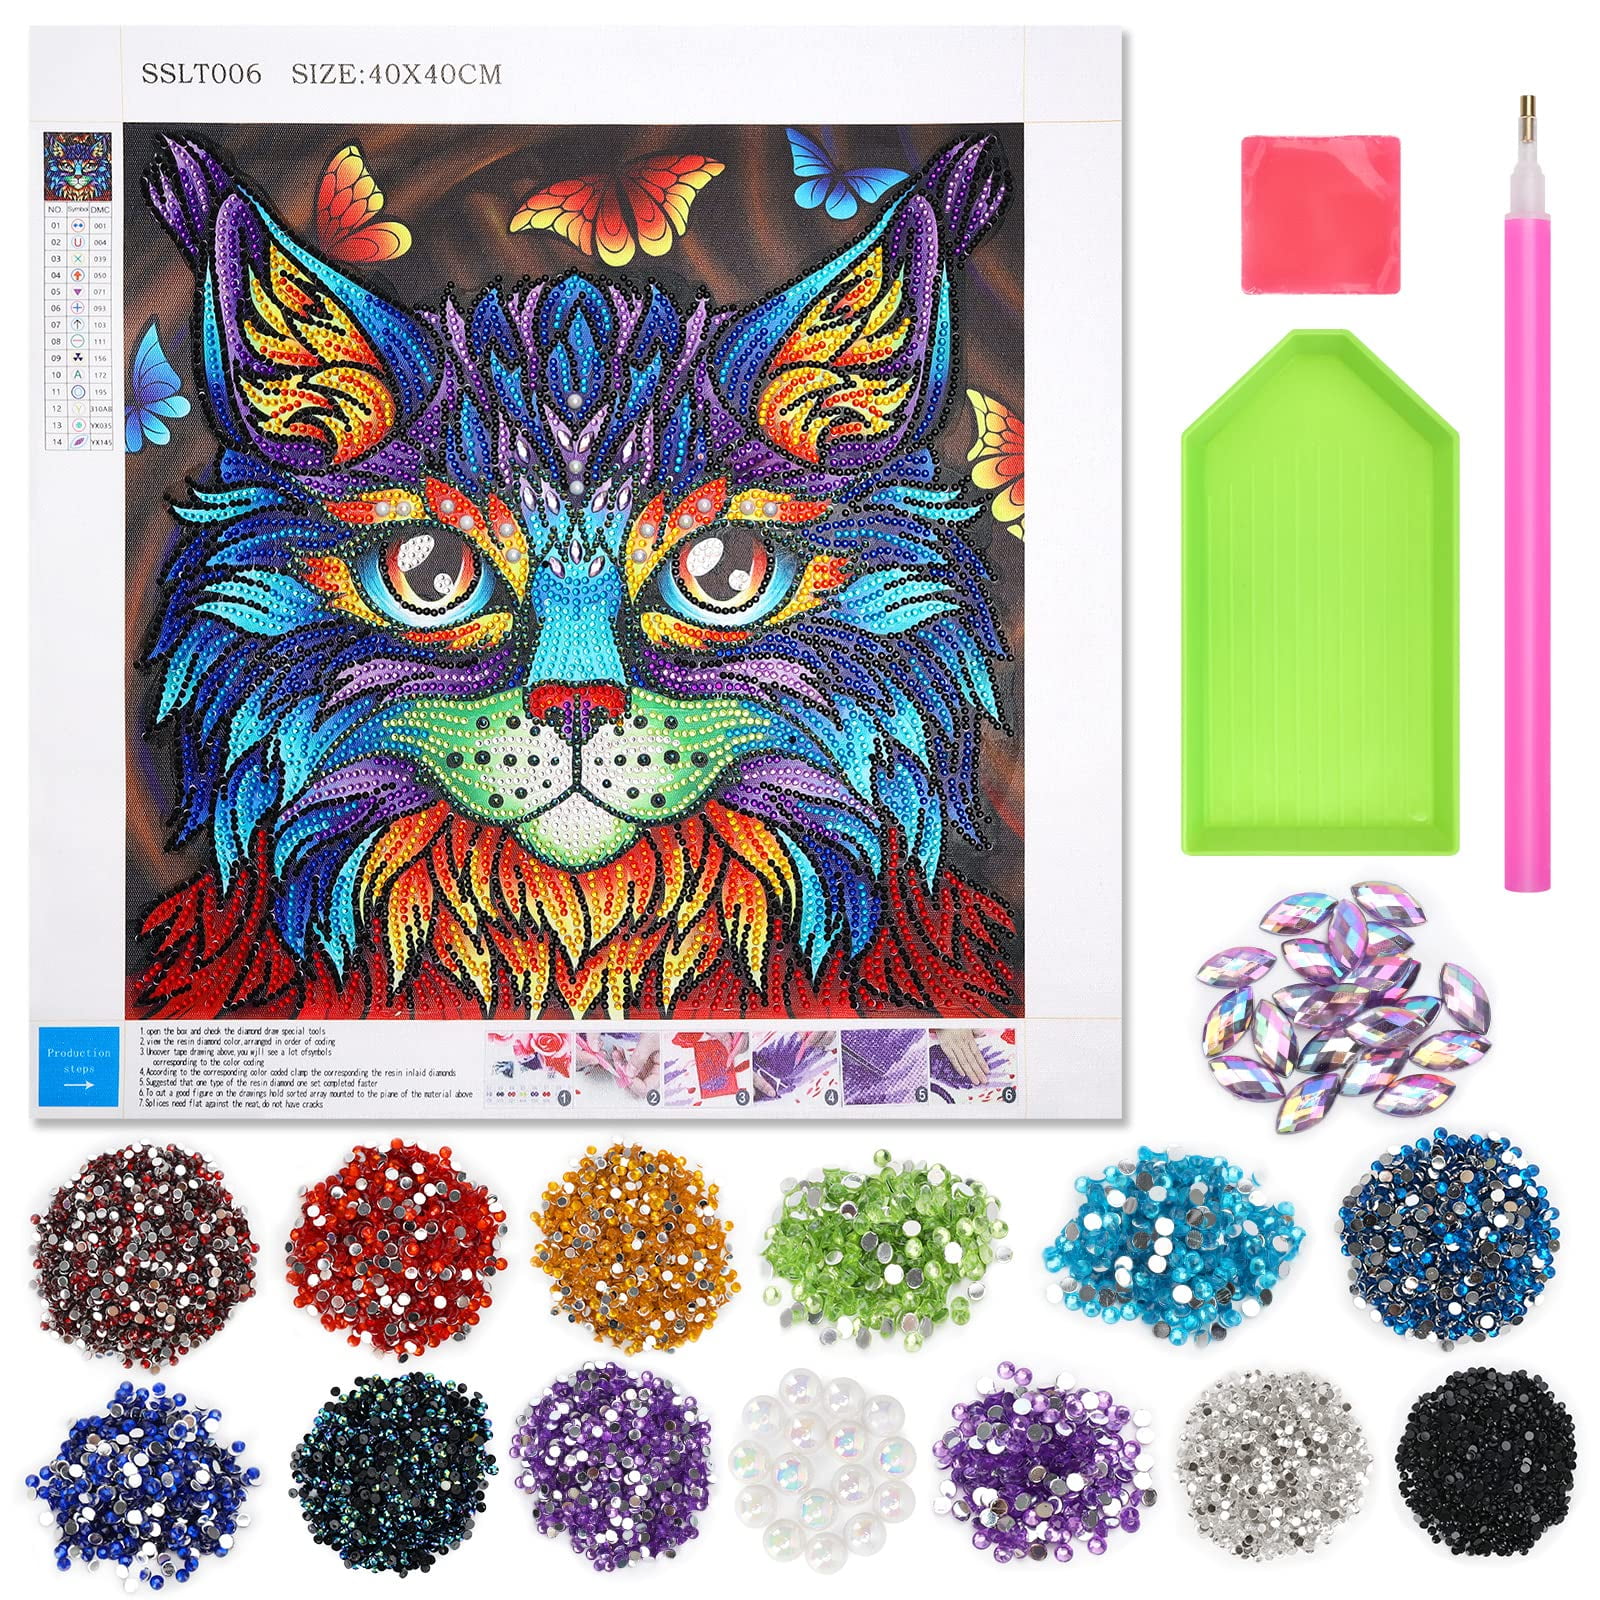 Diamond Painting – An Easy to Learn Crafting Project - Empowerline